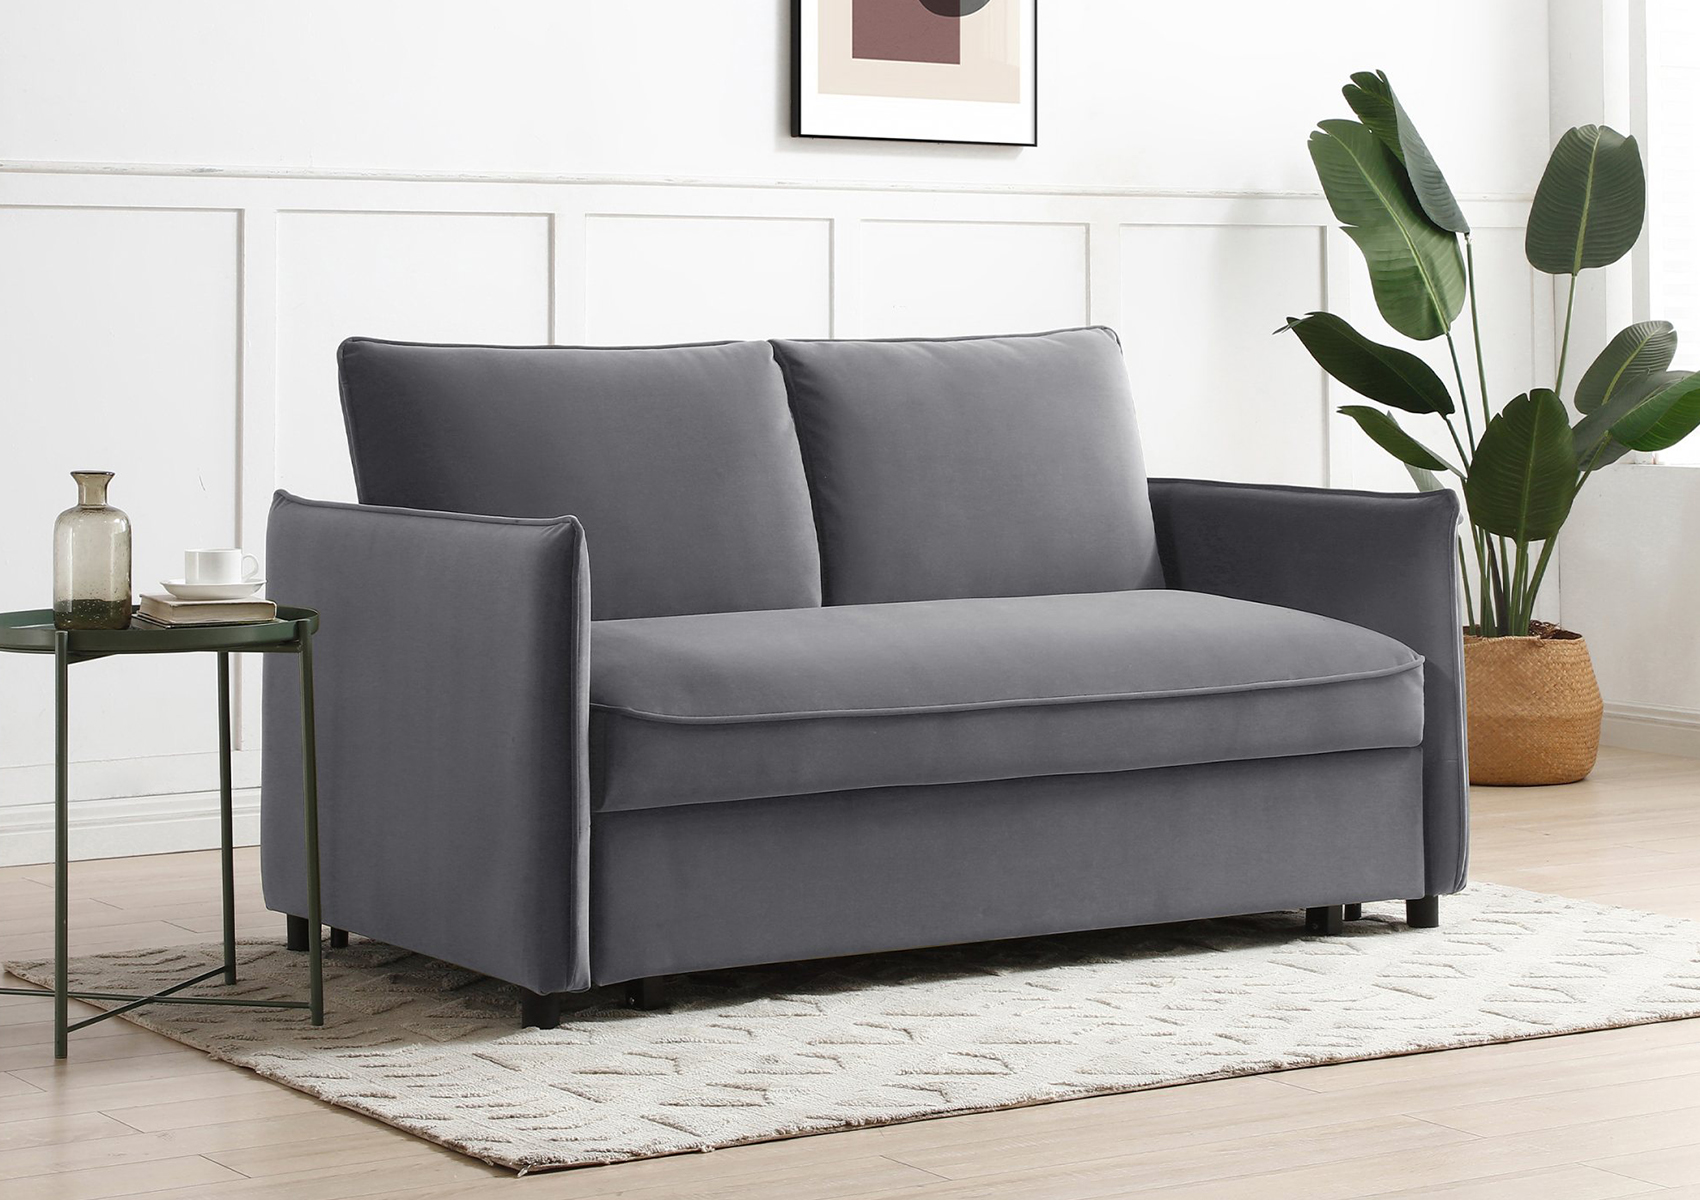 View Coniston Grey 2 Seater Sofa Bed Time4Sleep information